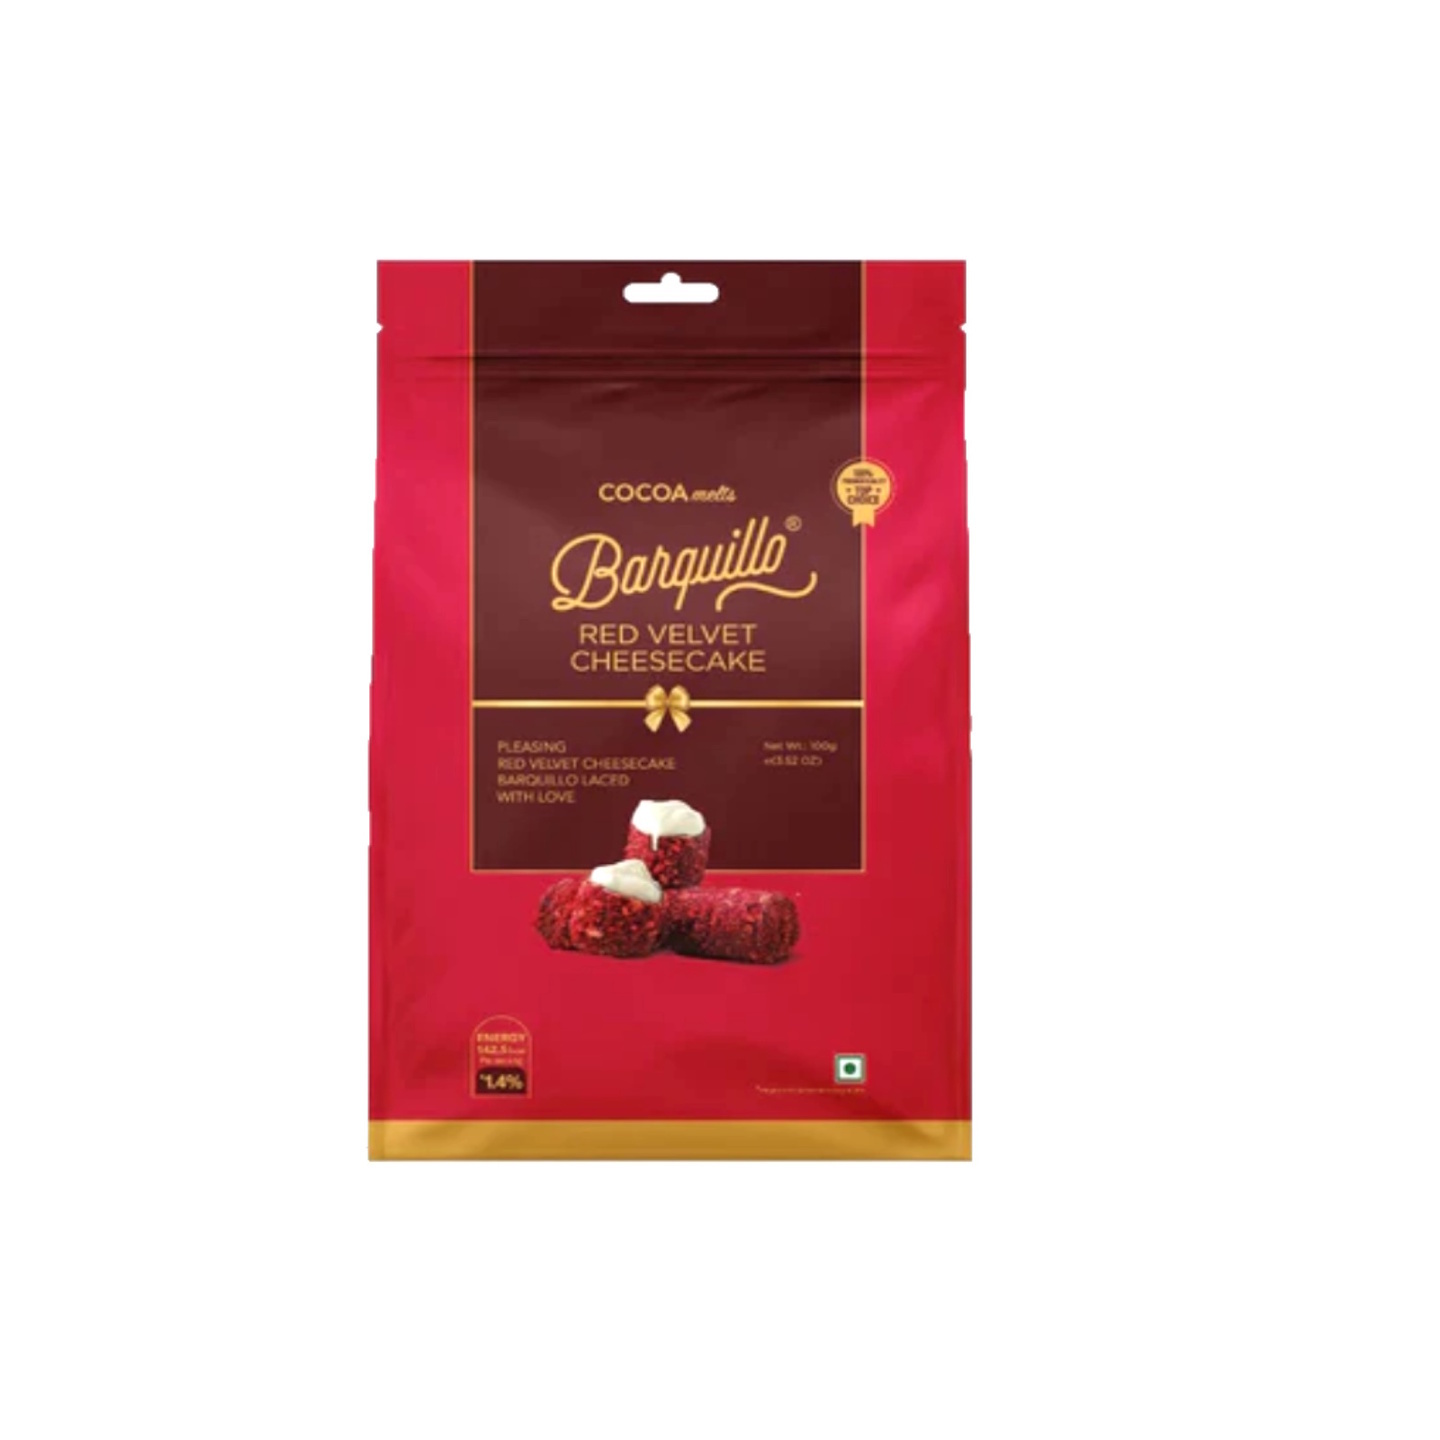 Cocoa Melts Barquillo Red Velvet Cheesecake Chocolate 100 Gms